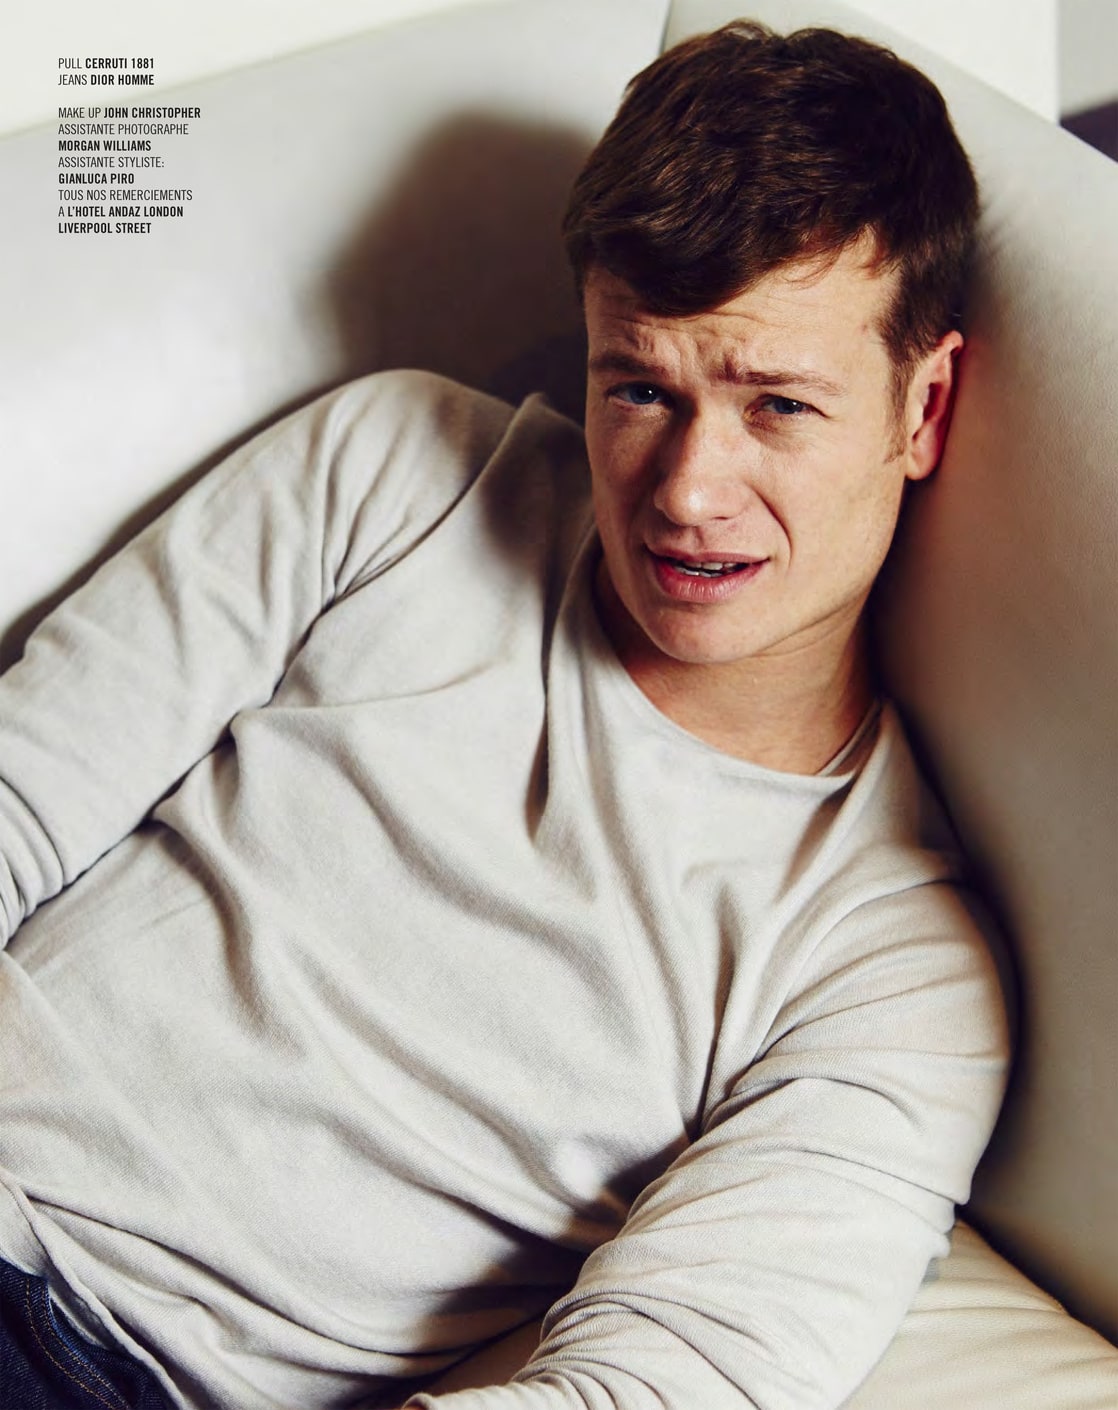 Ed Speleers had to have lessons in walking for Downton Abbey